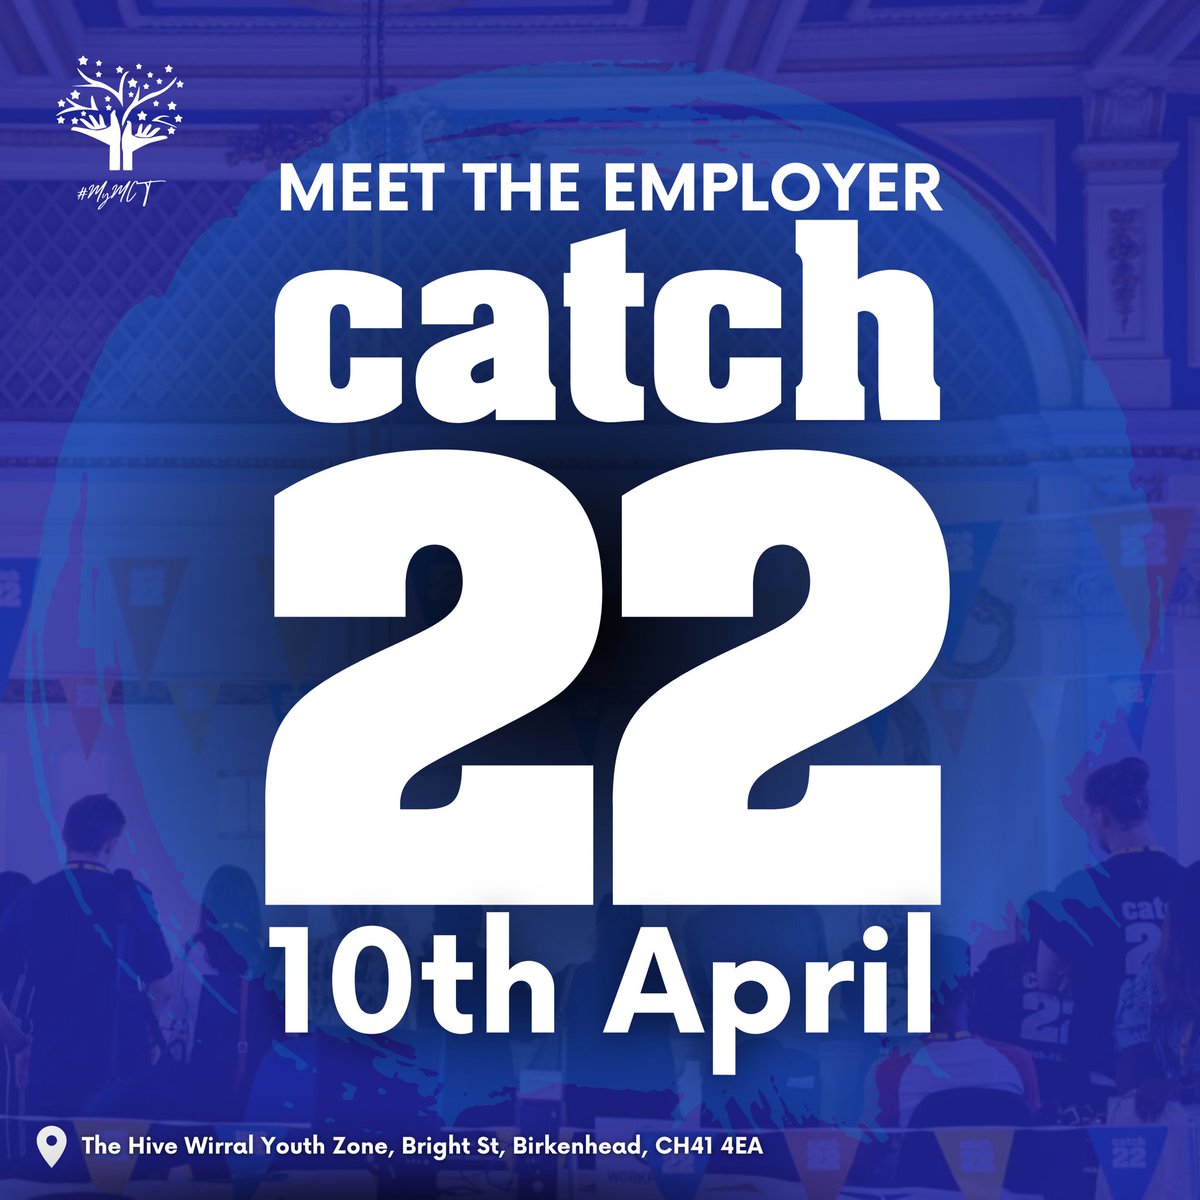 📢 At a crossroad with your future? 🏃Join us the 10th of April to meet with Catch22 and see what job and training opportunities they present to you! ⭐️ See you there… #BetterTogether at #MyMCT #Wirral #LiverpoolCityRegion #entrepreneurship #Youthempowerment #Youthemployment